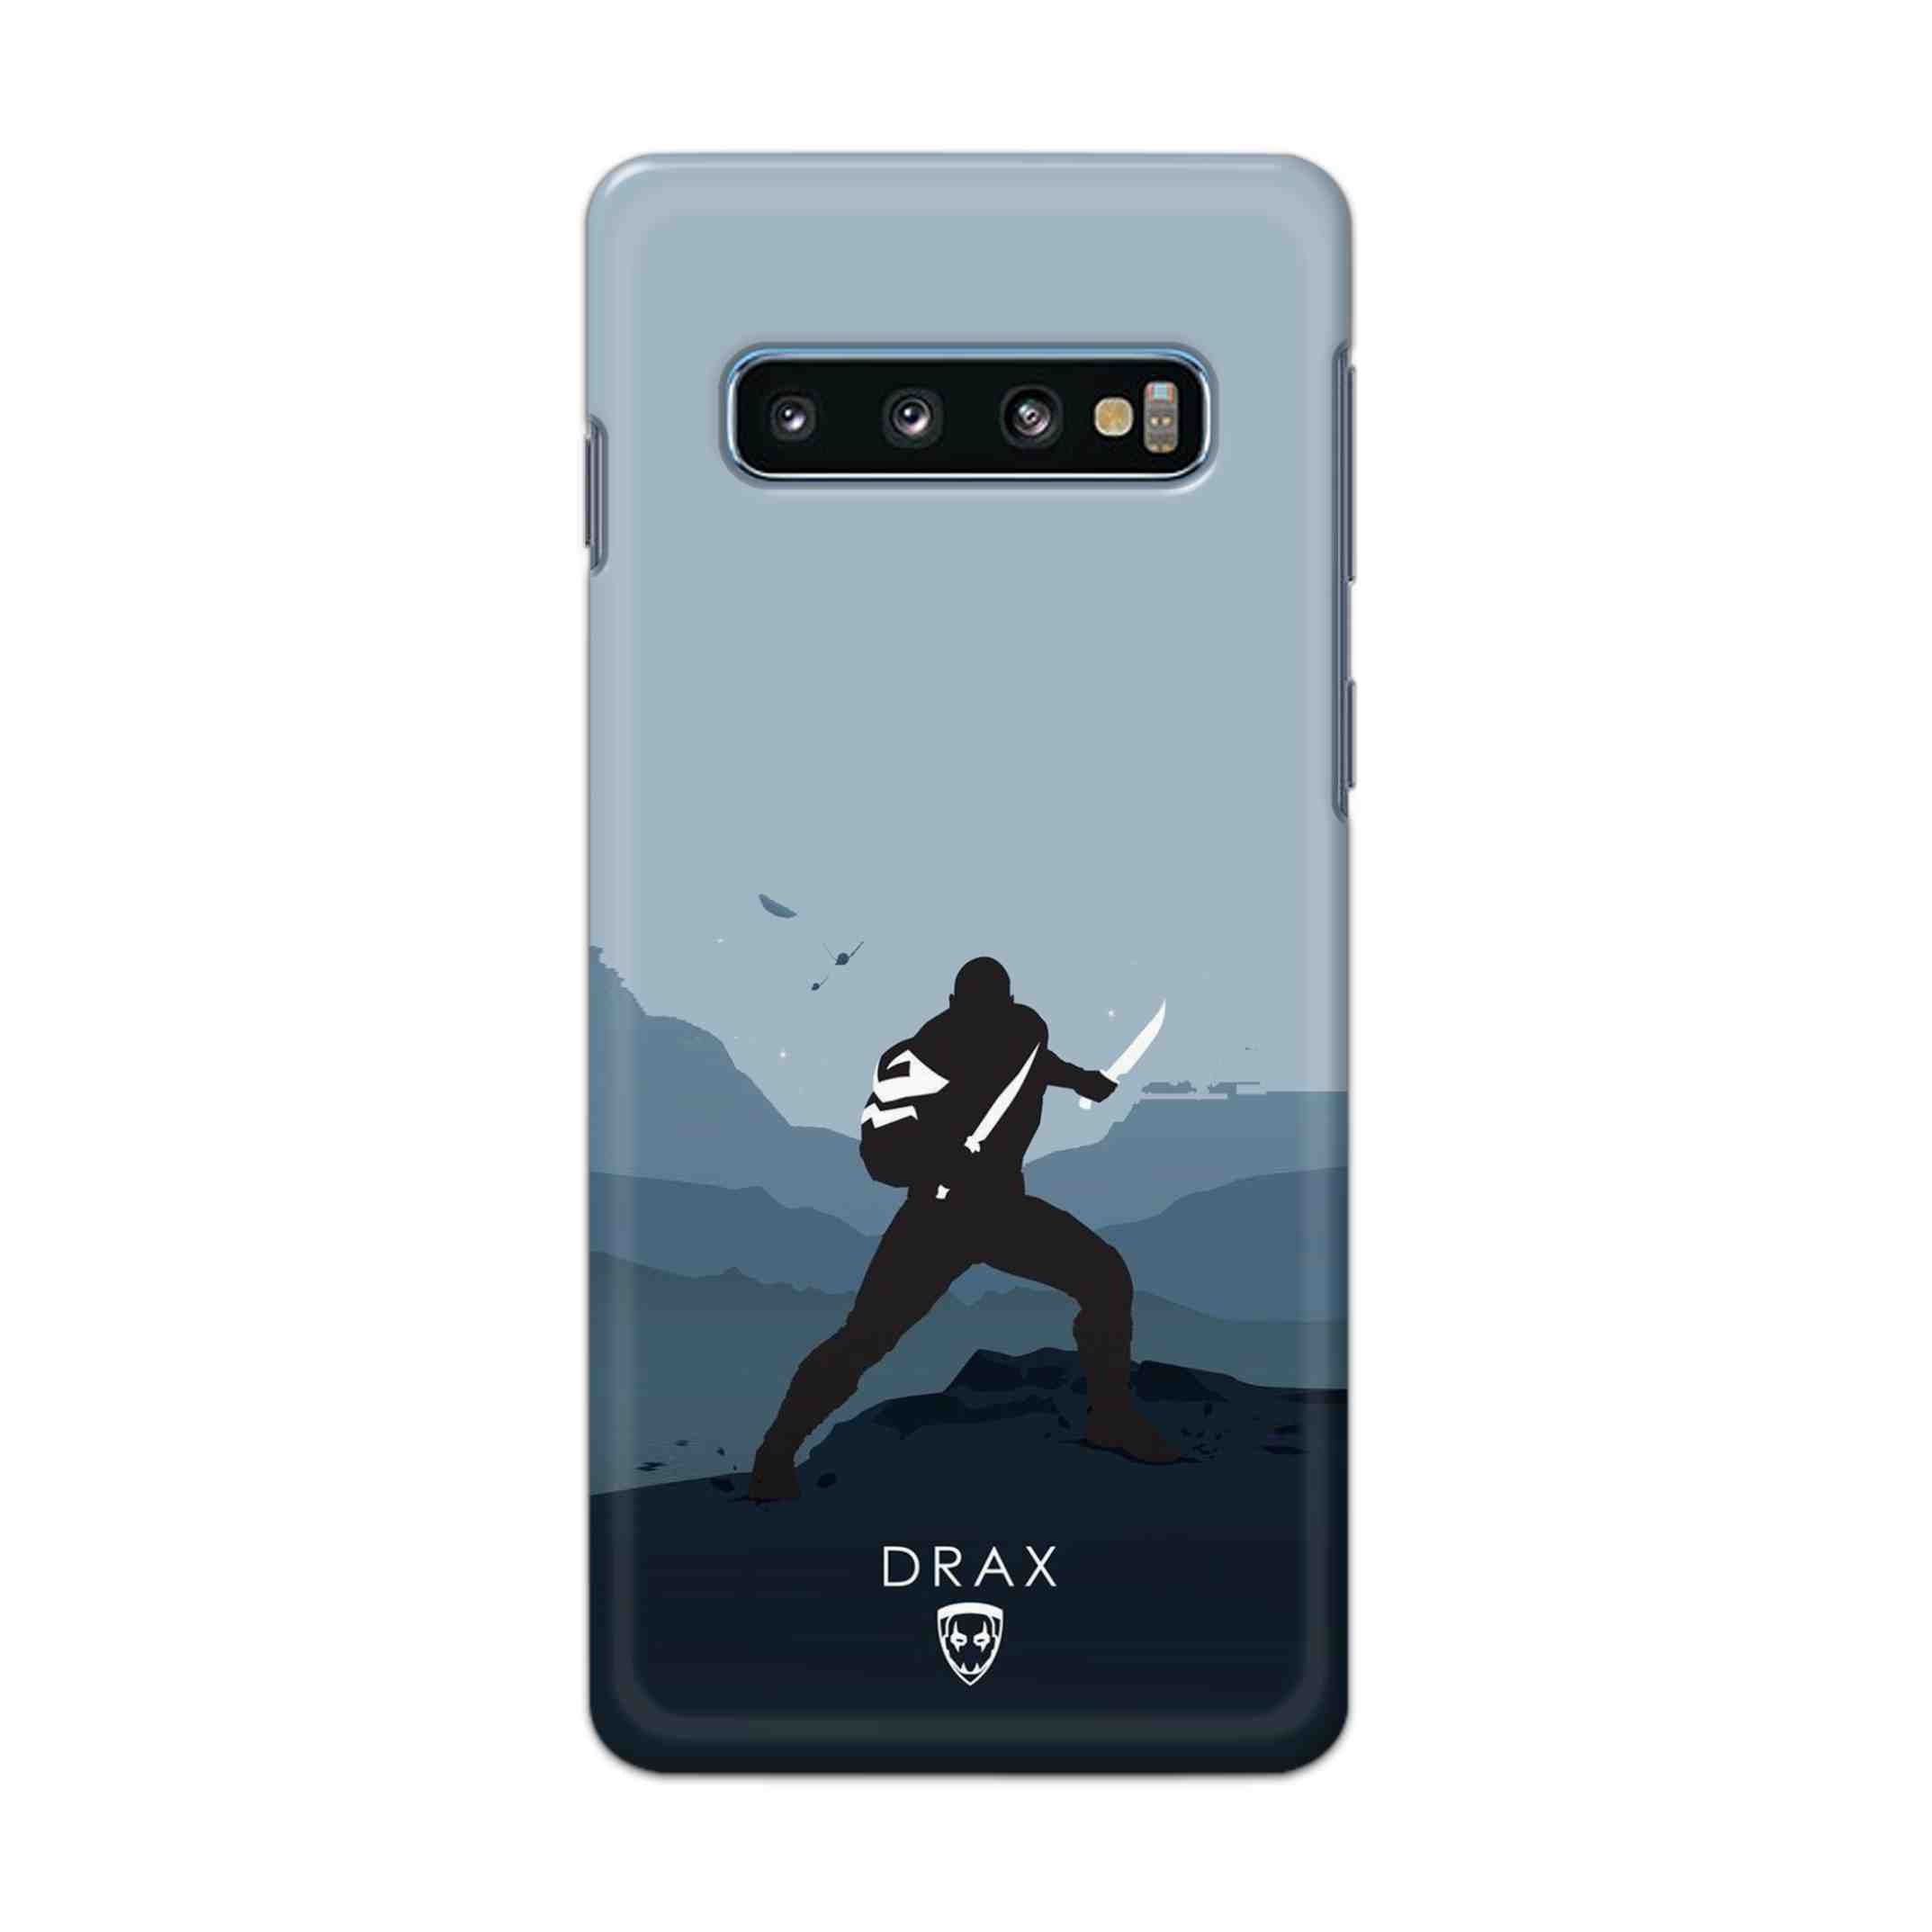 Buy Drax Hard Back Mobile Phone Case Cover For Samsung Galaxy S10 Plus Online